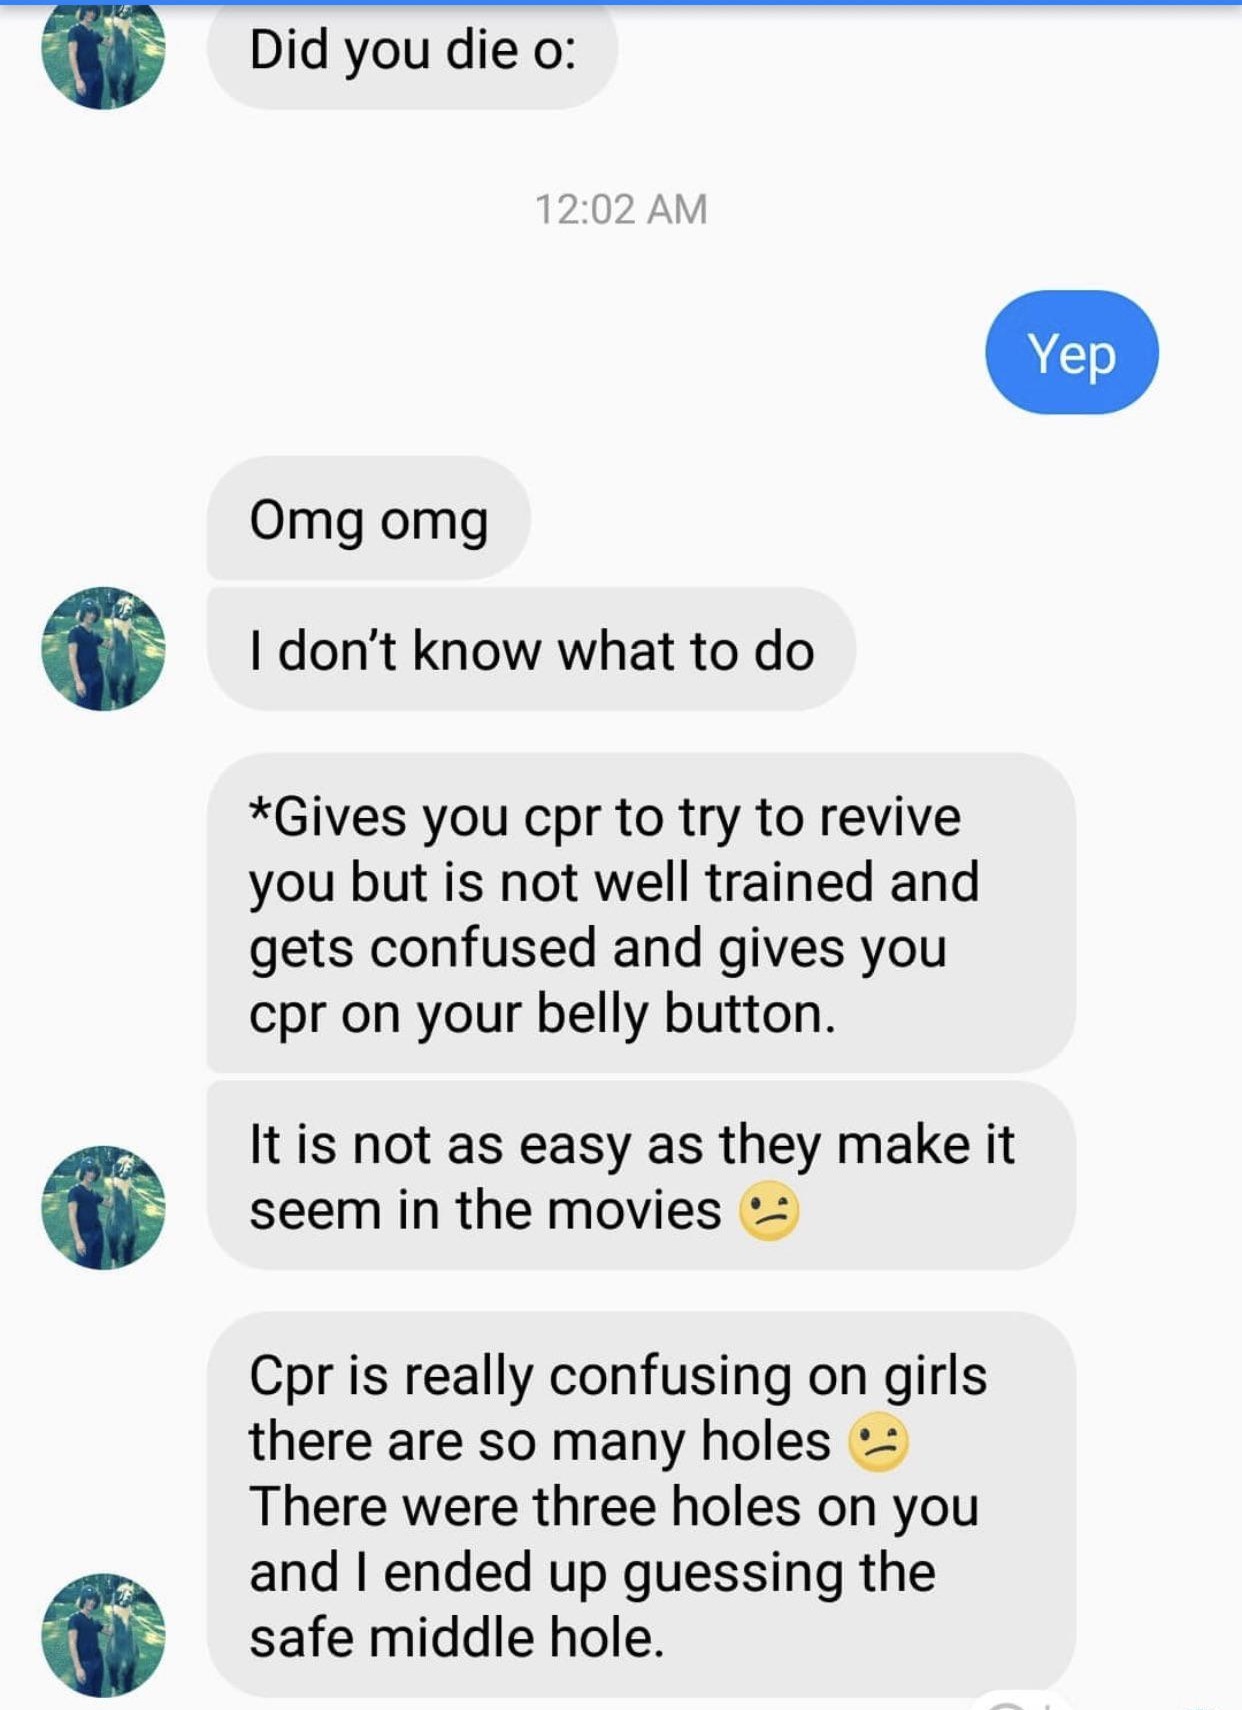 Did you die o Yep Omg omg I don't know what to do Gives you cpr to try to revive you but is not well trained and gets confused and gives you cpr on your belly button. It is not as easy as they make it seem in the movies Cpr is really confusing on girls…